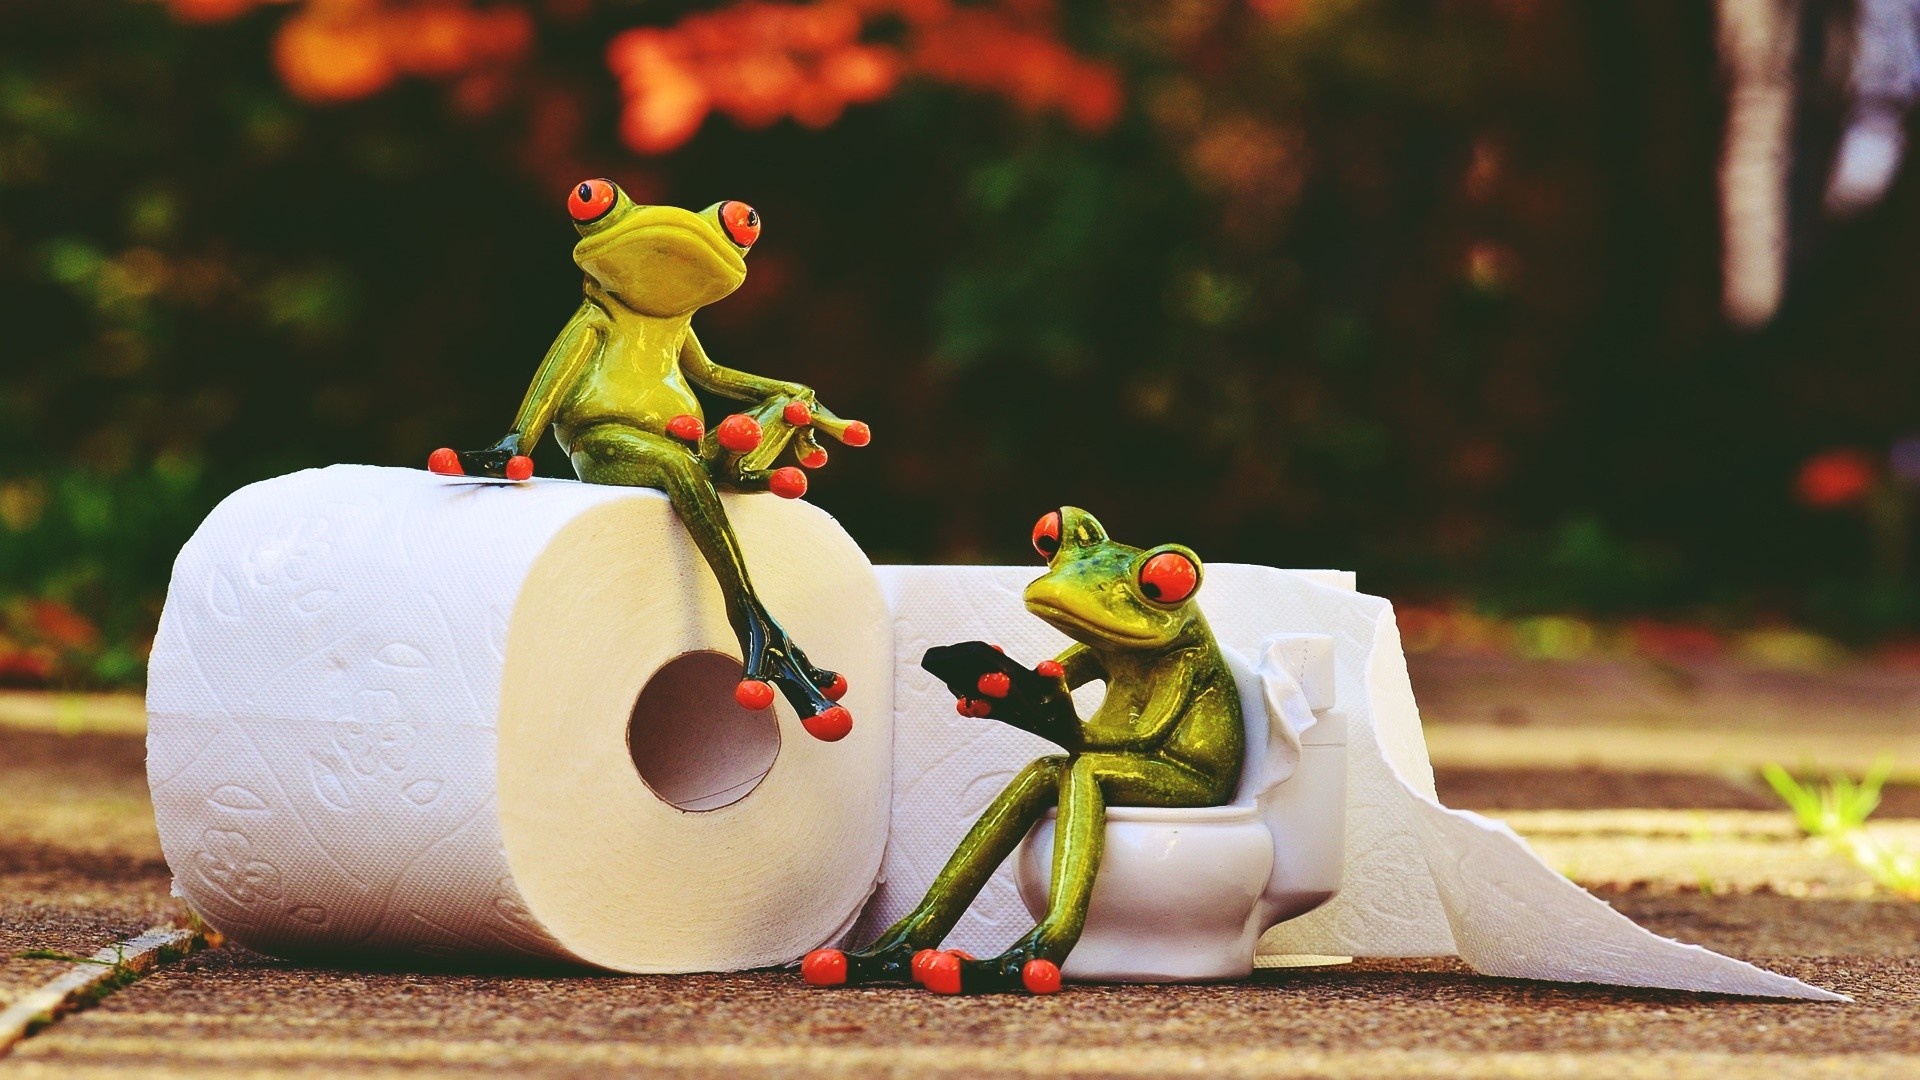 animals, red, green, yellow, frog, Retro style, vintage, spring, toilet paper, color, autumn, flower, season Gallery HD Wallpaper